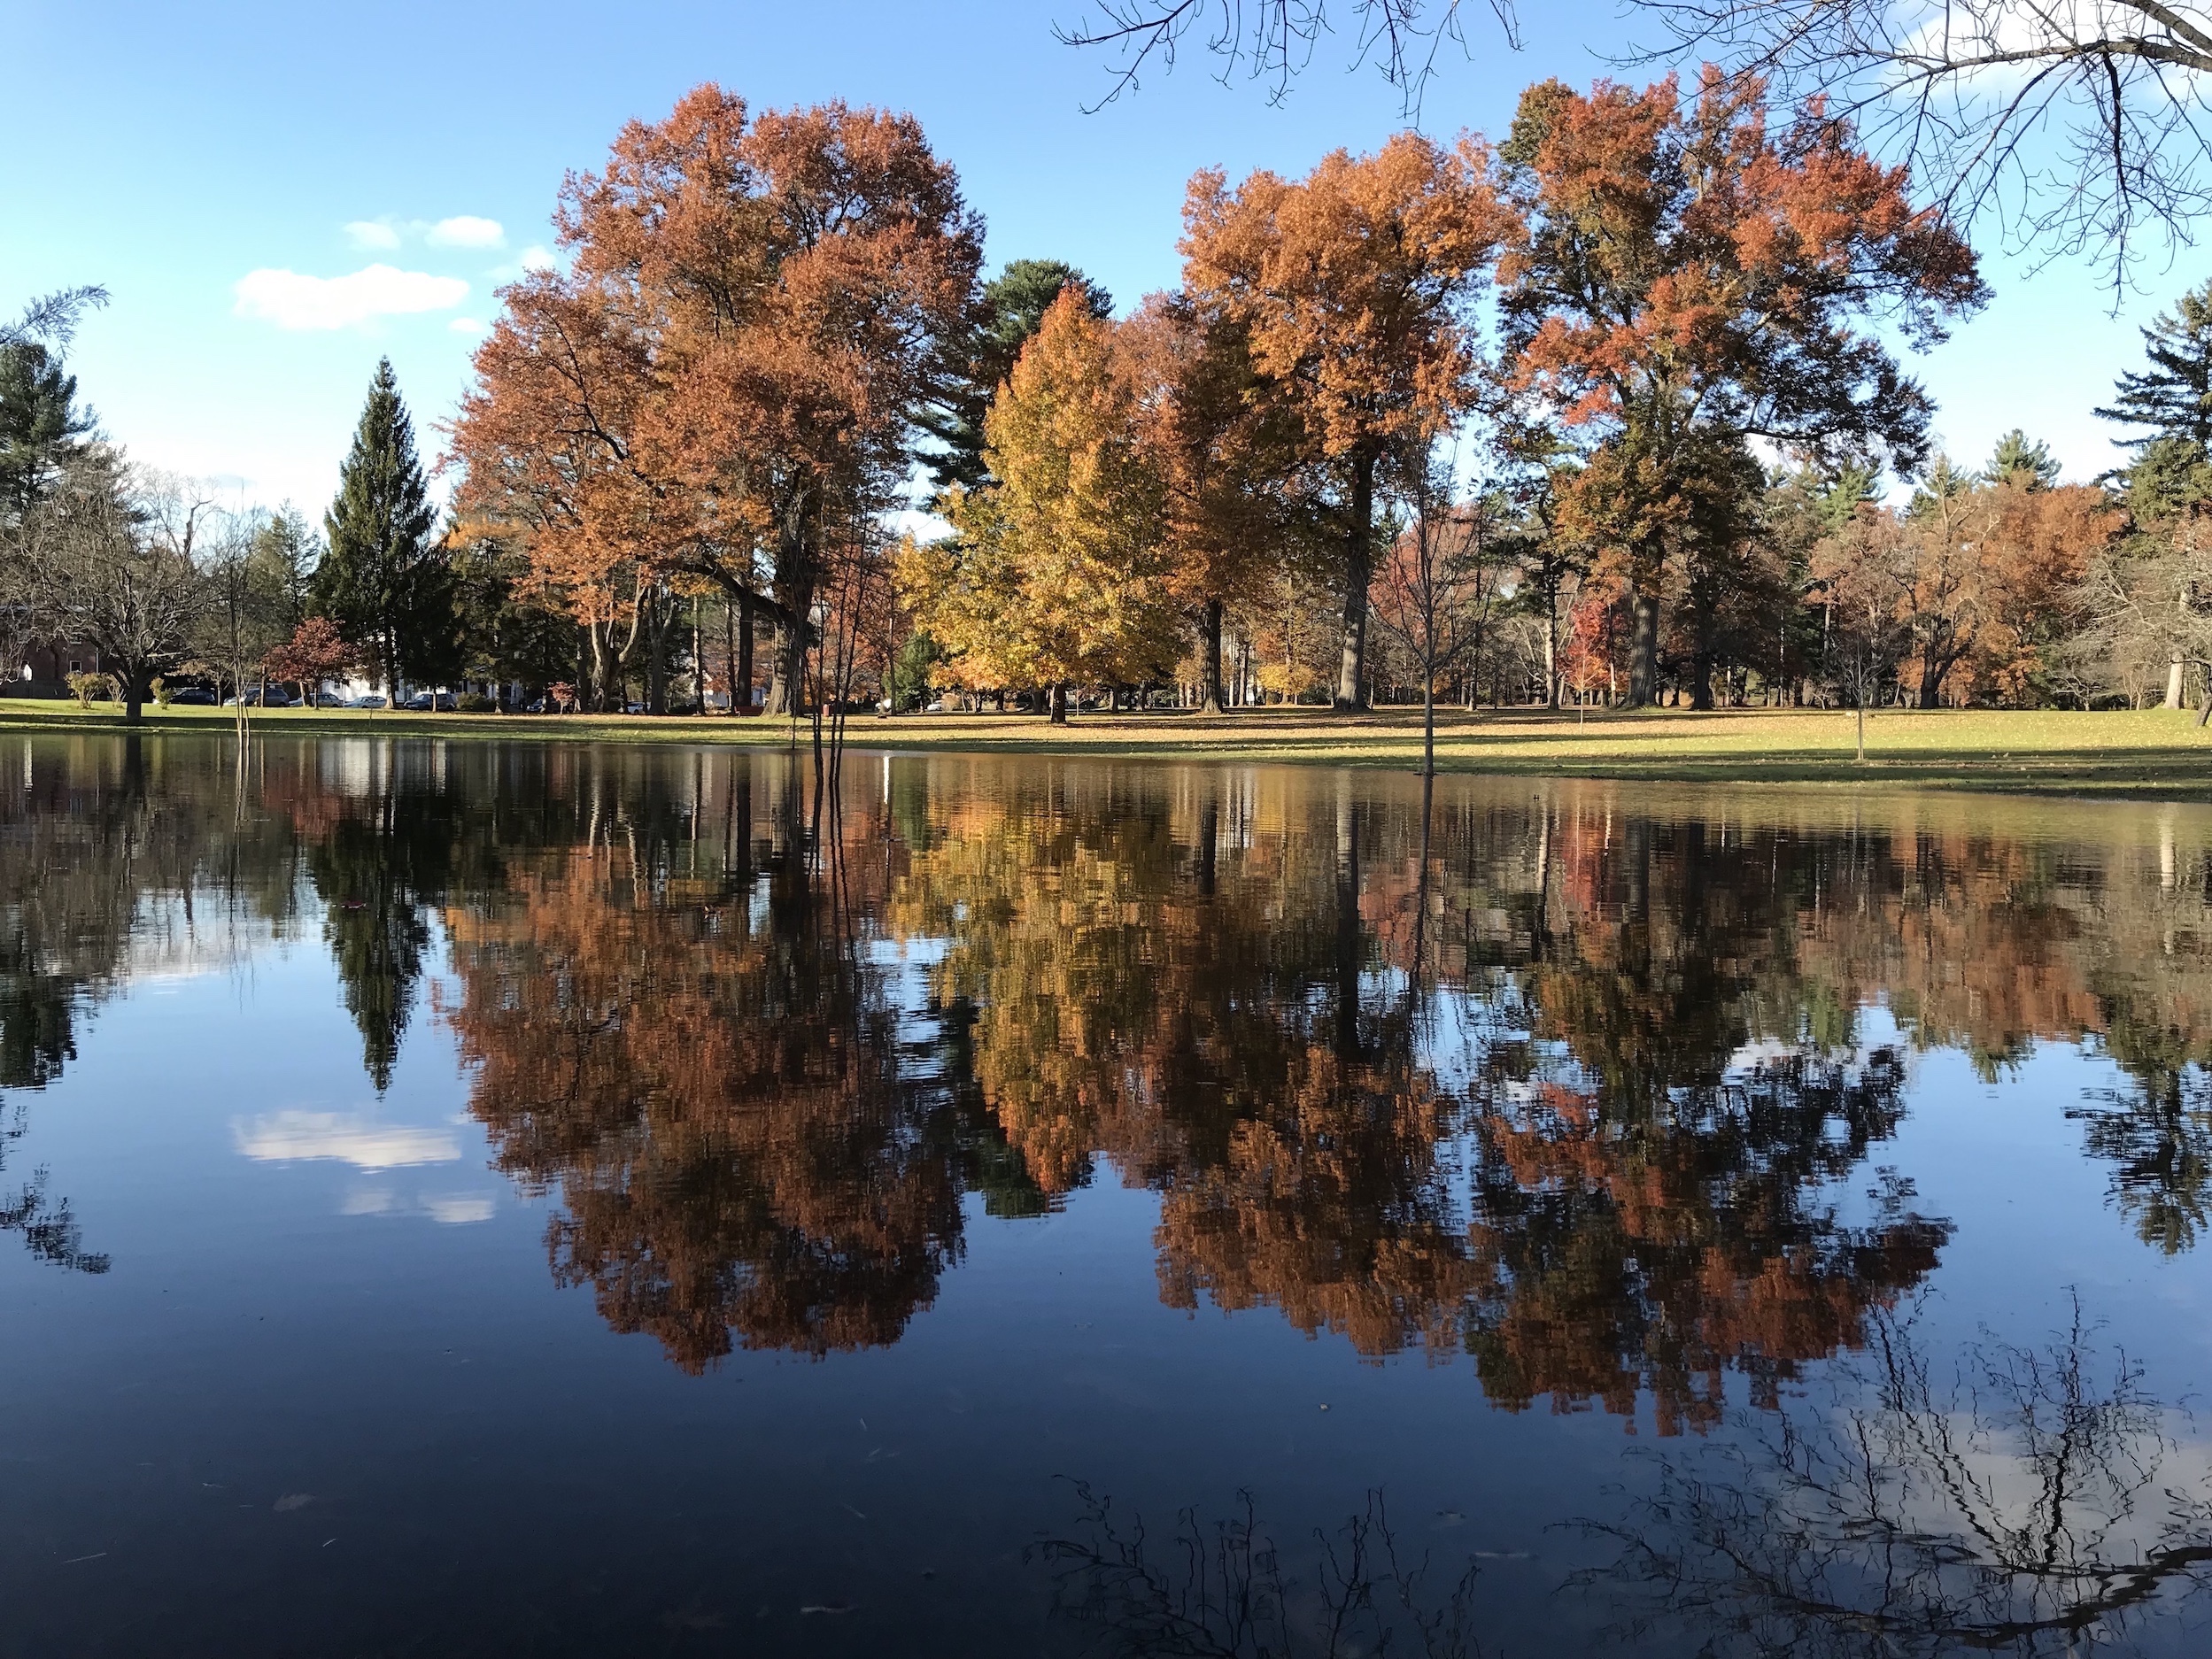 Reflections, digital image taken on IPhone 7 Plus, by Quincy Biddle